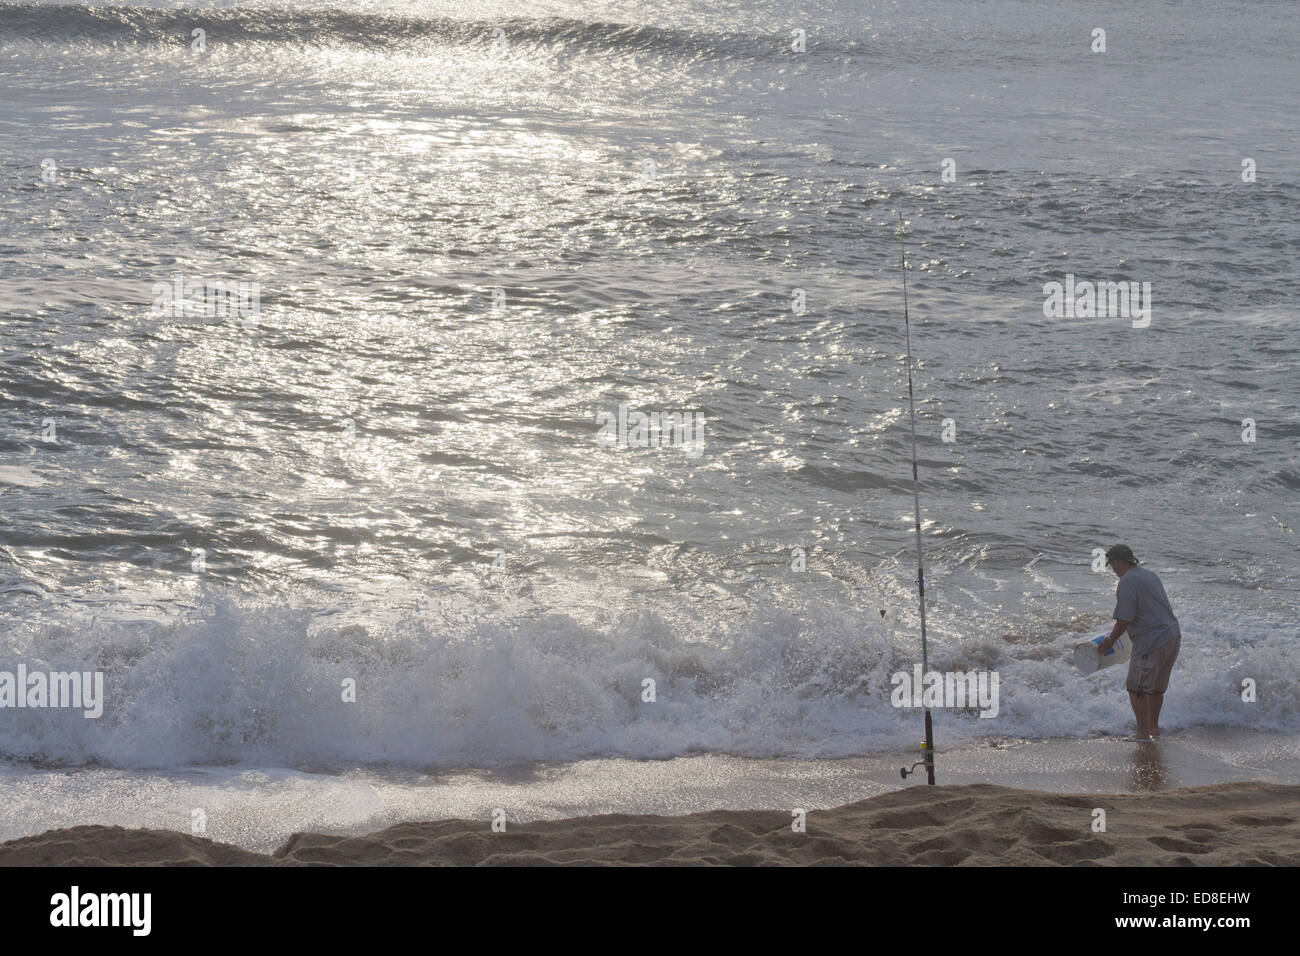 Cape Hatteras, Outer Banks, North Carolina, USA - October 18, 2013:  Man washes a bucket in the sea next to his fishing pole Stock Photo